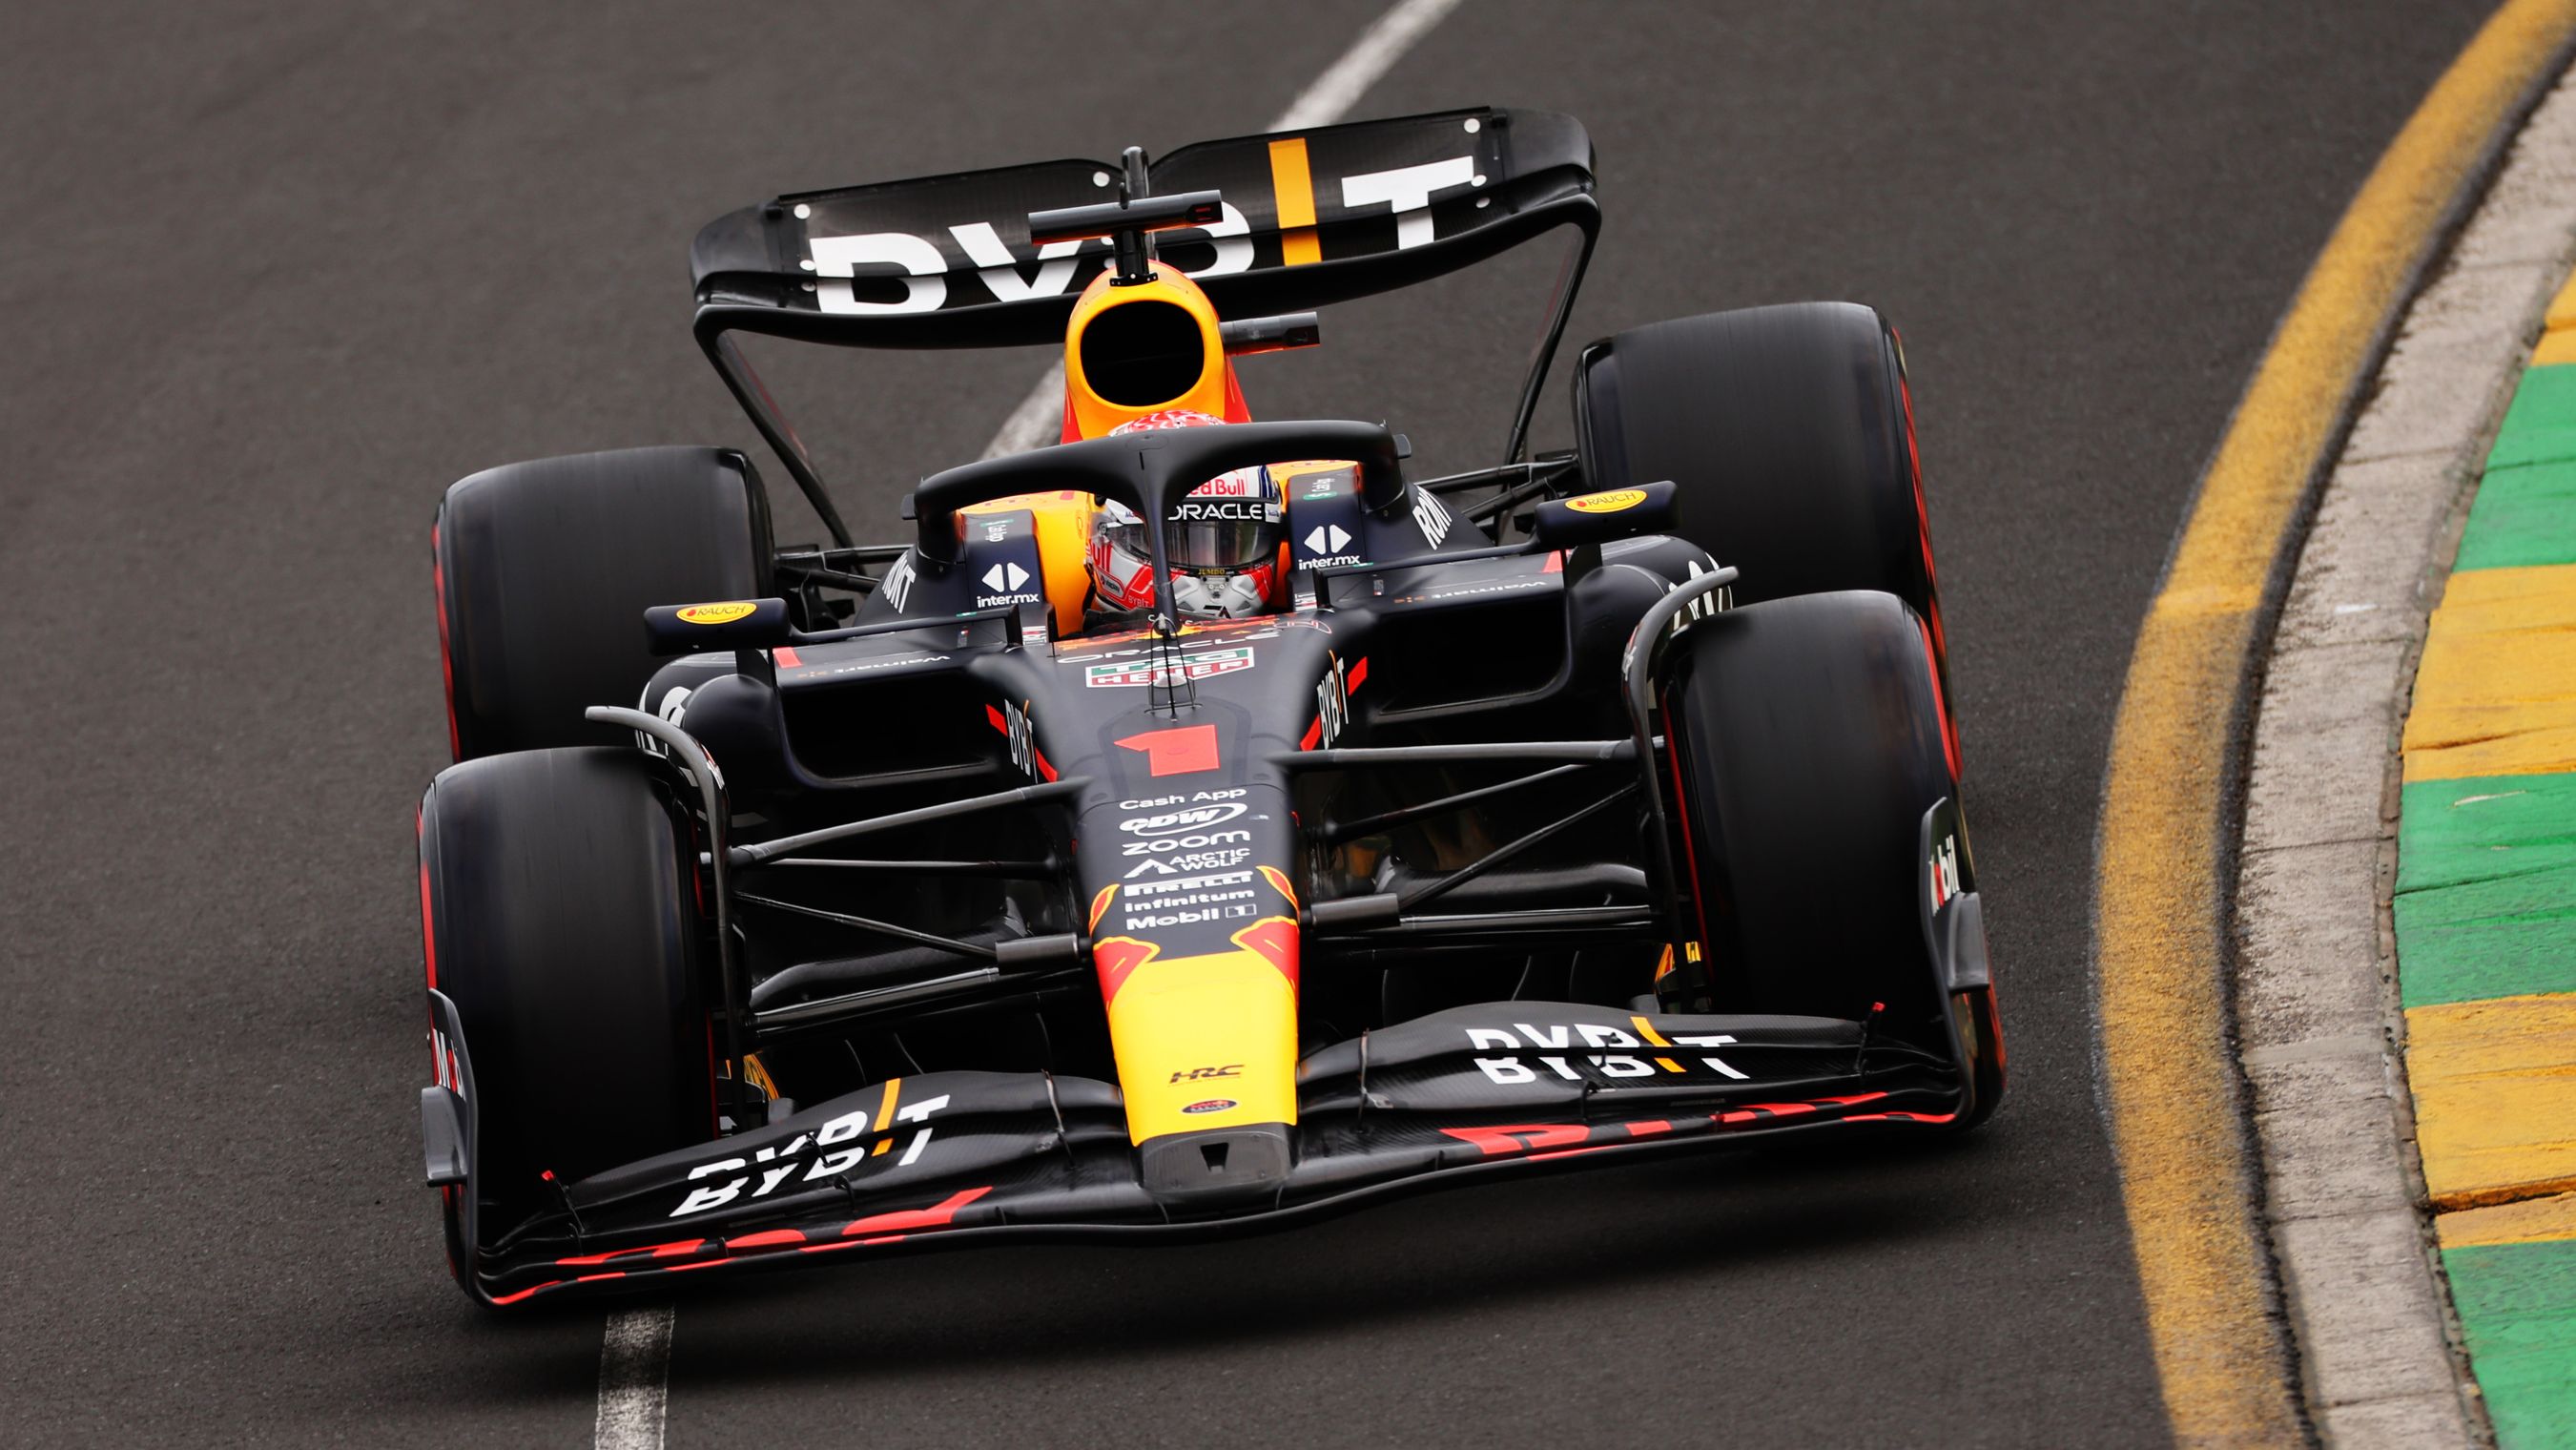 Max Verstappen during qualifying ahead of the Australian Grand Prix.